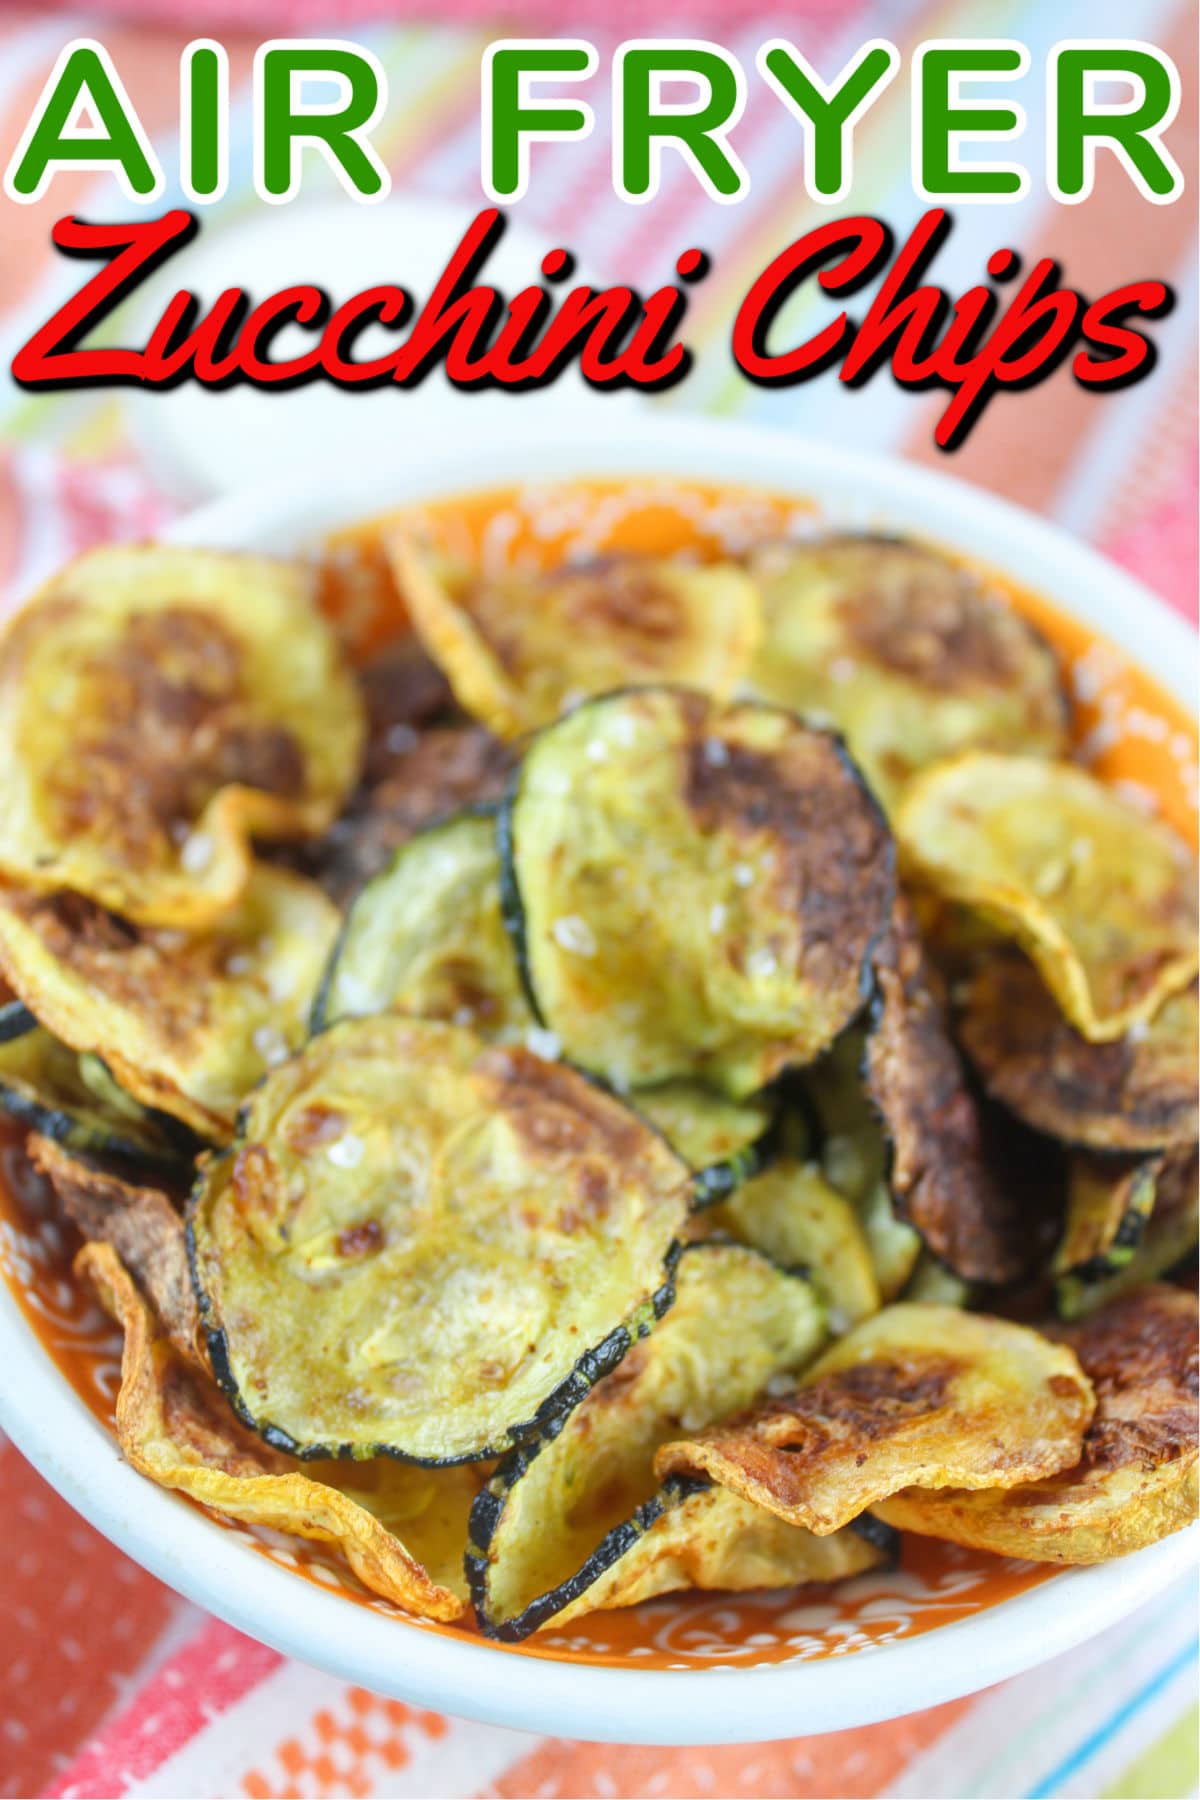 I love my breaded veggies in the air fryer but sometimes a simple EVOO + seasoning is best! These Air Fryer Zucchini Chips are just the side dish for that treatment. Zucchini doesn't have a ton of flavor on it's own - so just adding a bit of EVOO and garlic herb makes it so delish! via @foodhussy